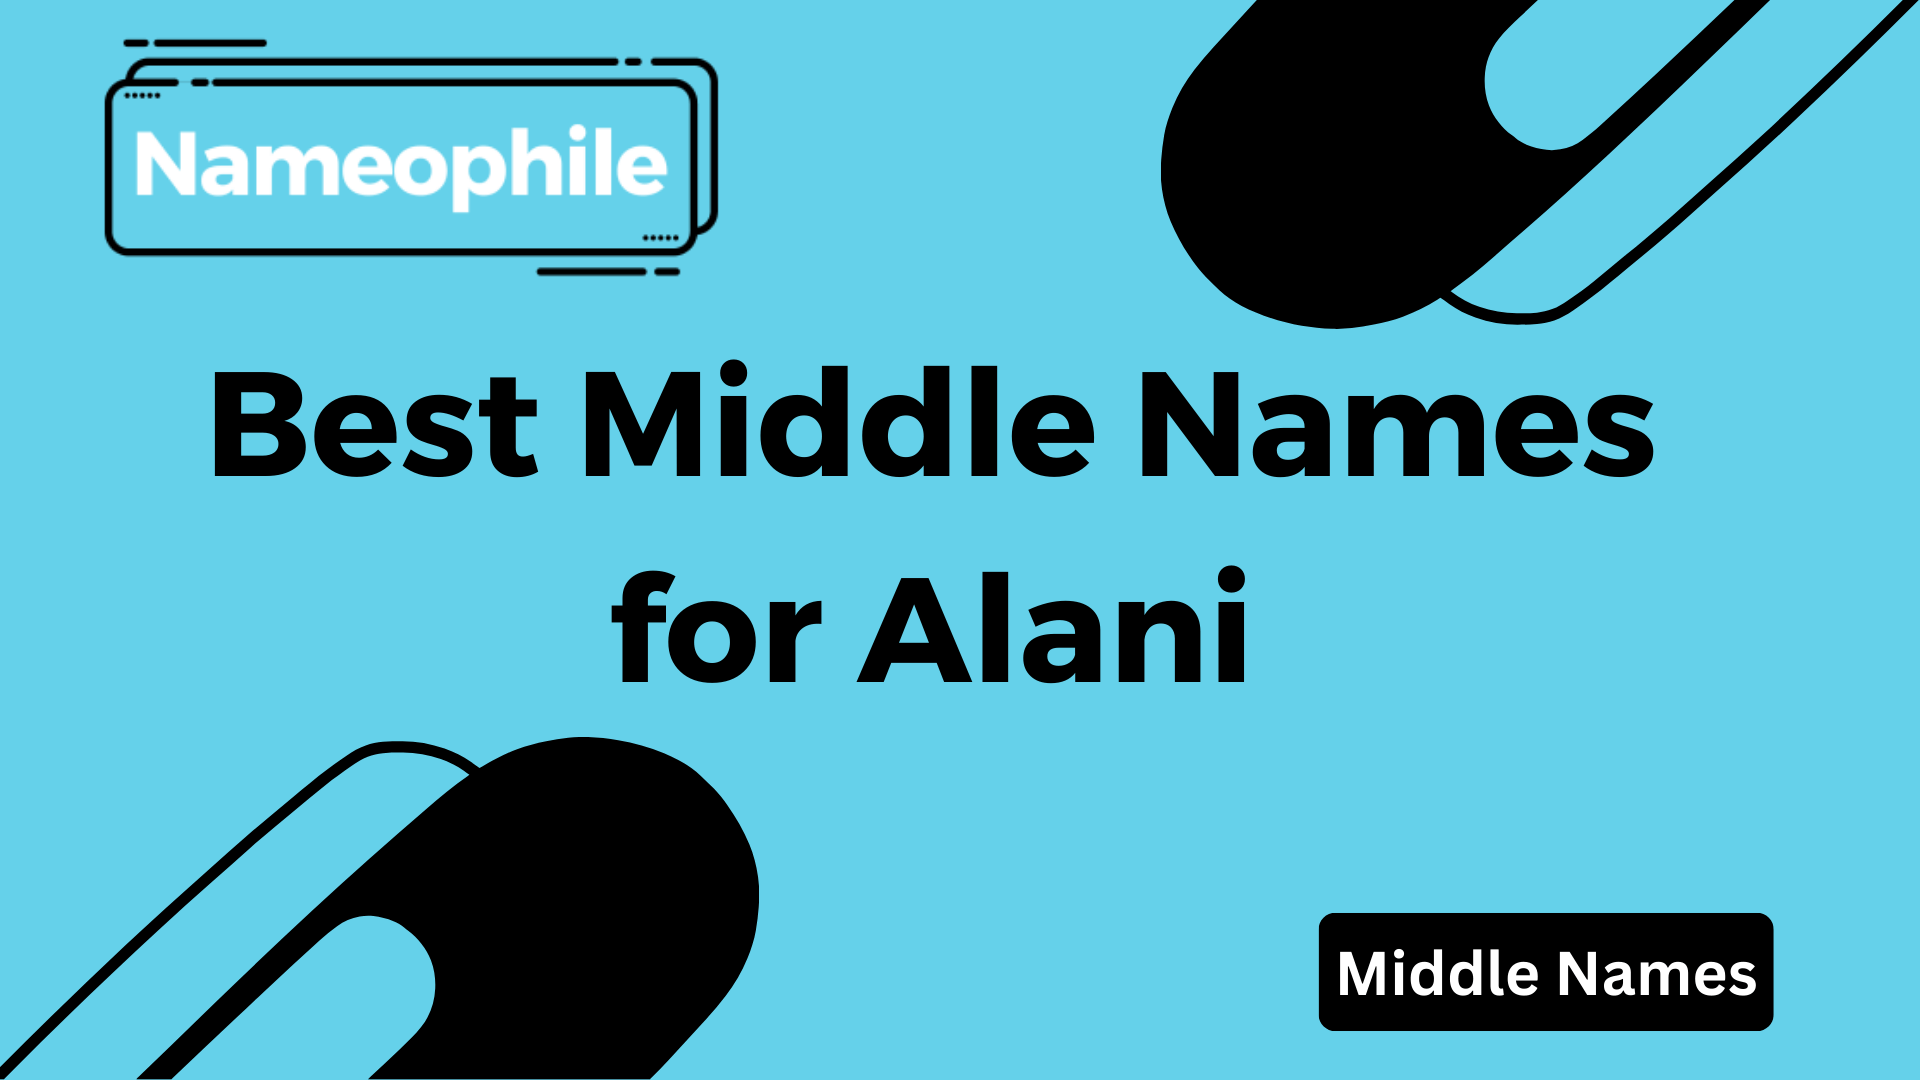 Best Middle Names for Alani